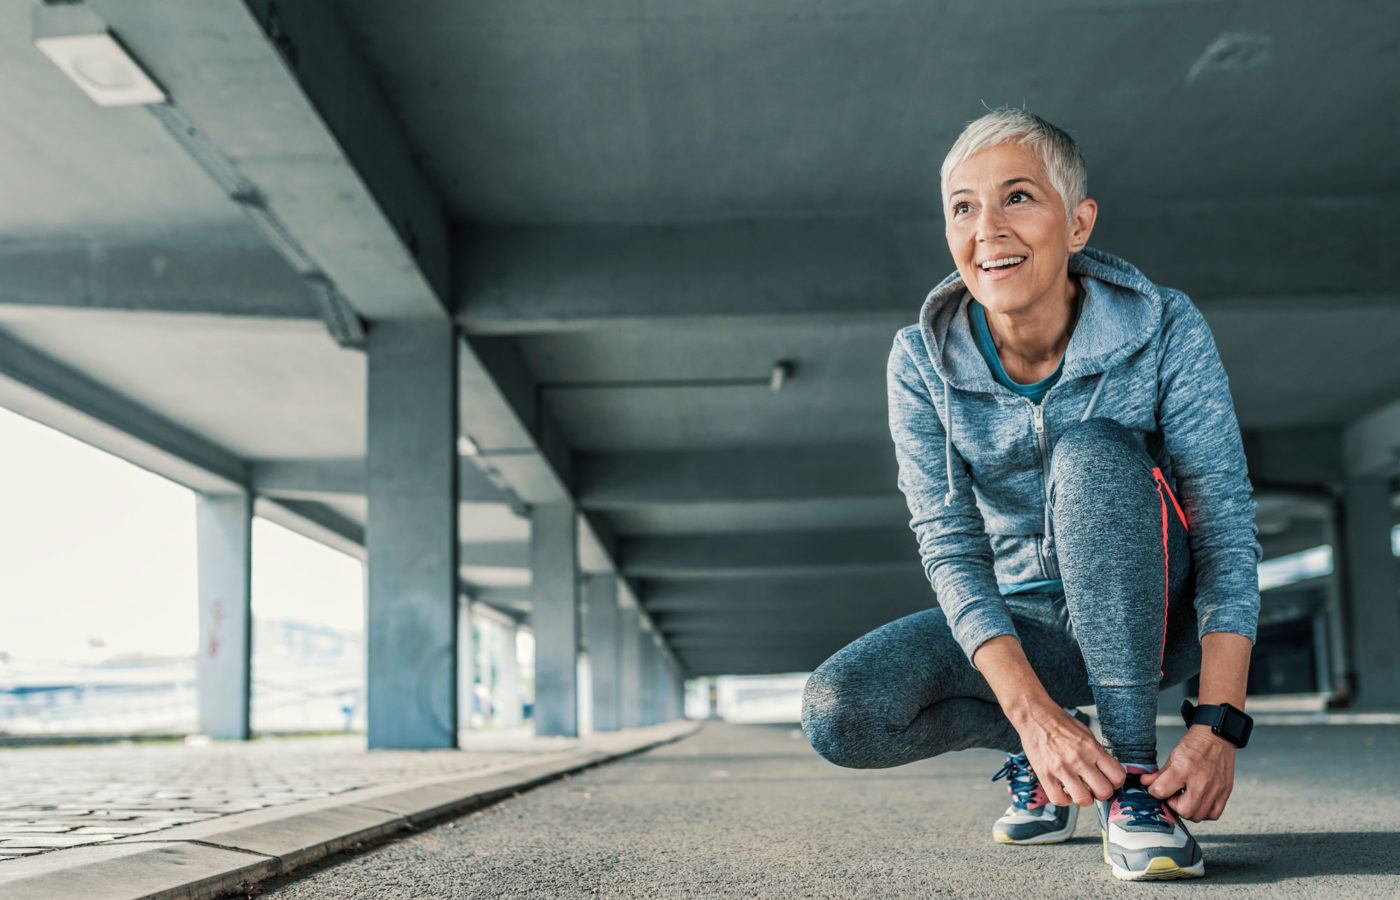 Mature woman ties her shoe as she sets out for a run